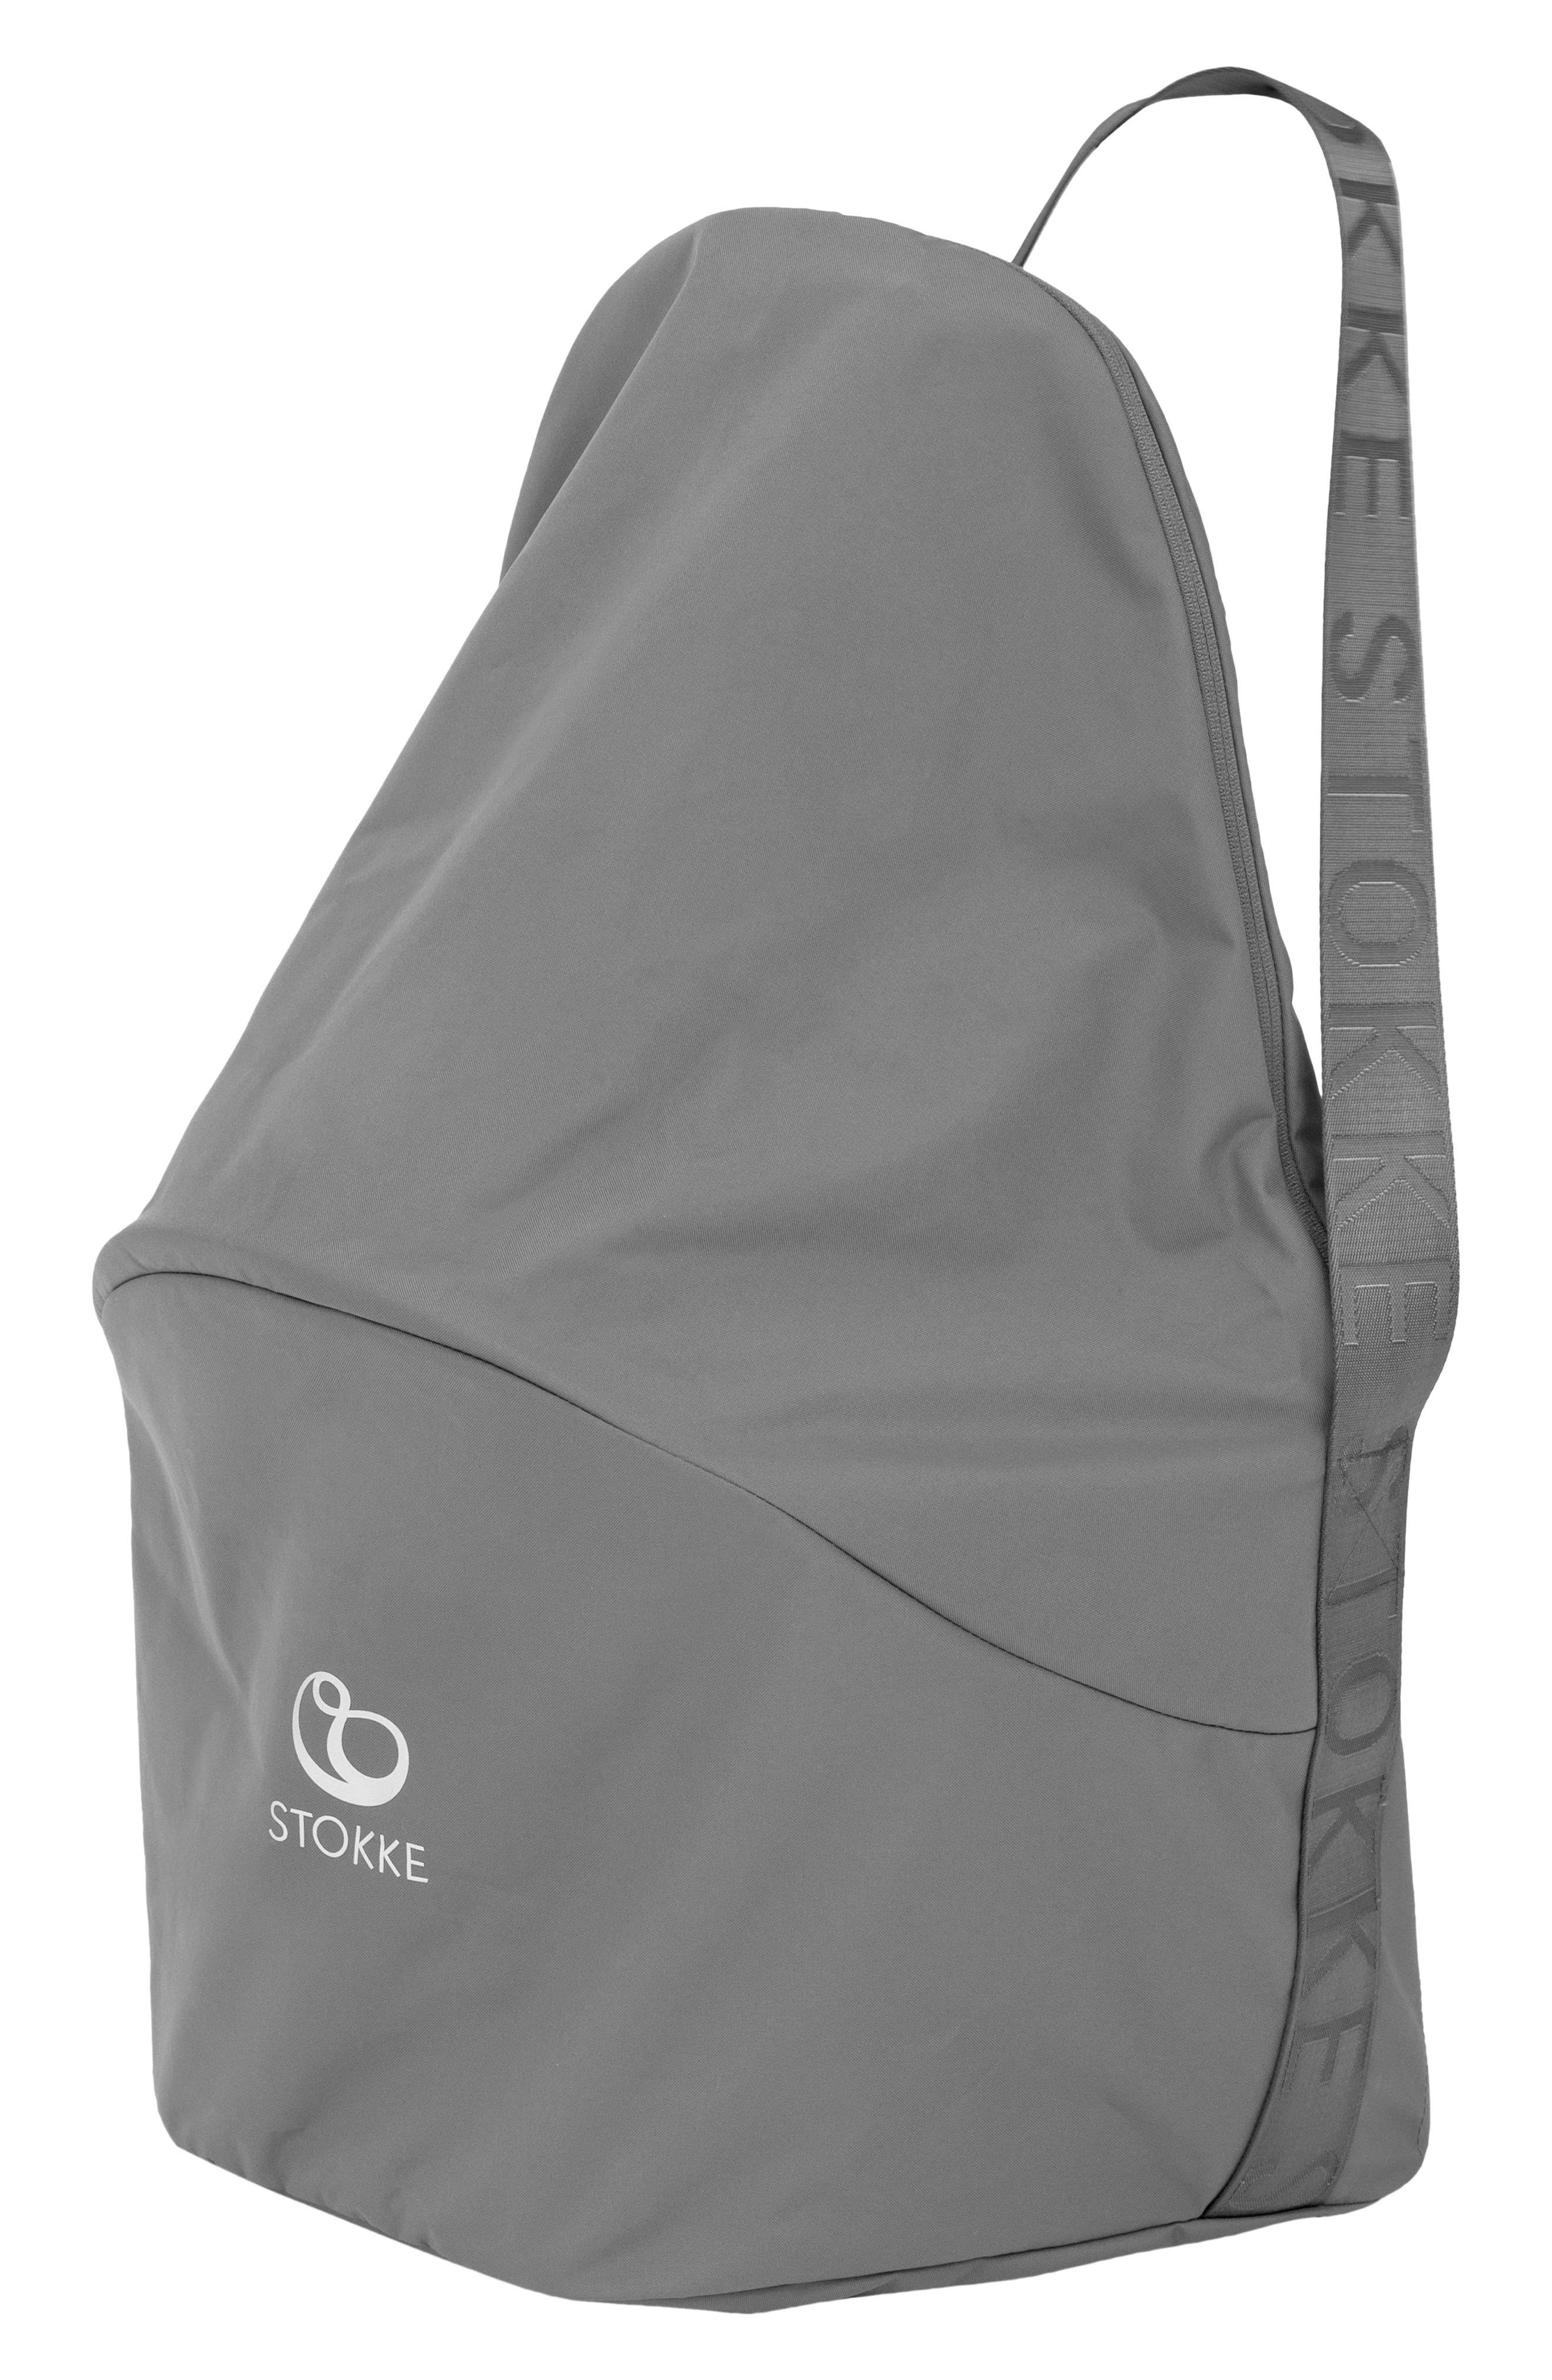 Stokke Clikk High Chair Travel Bag, Grey - Essential For Travel & Storage - Compatible with Stokke Clikk High Chair - 100% Polyester - Convenient, Spa